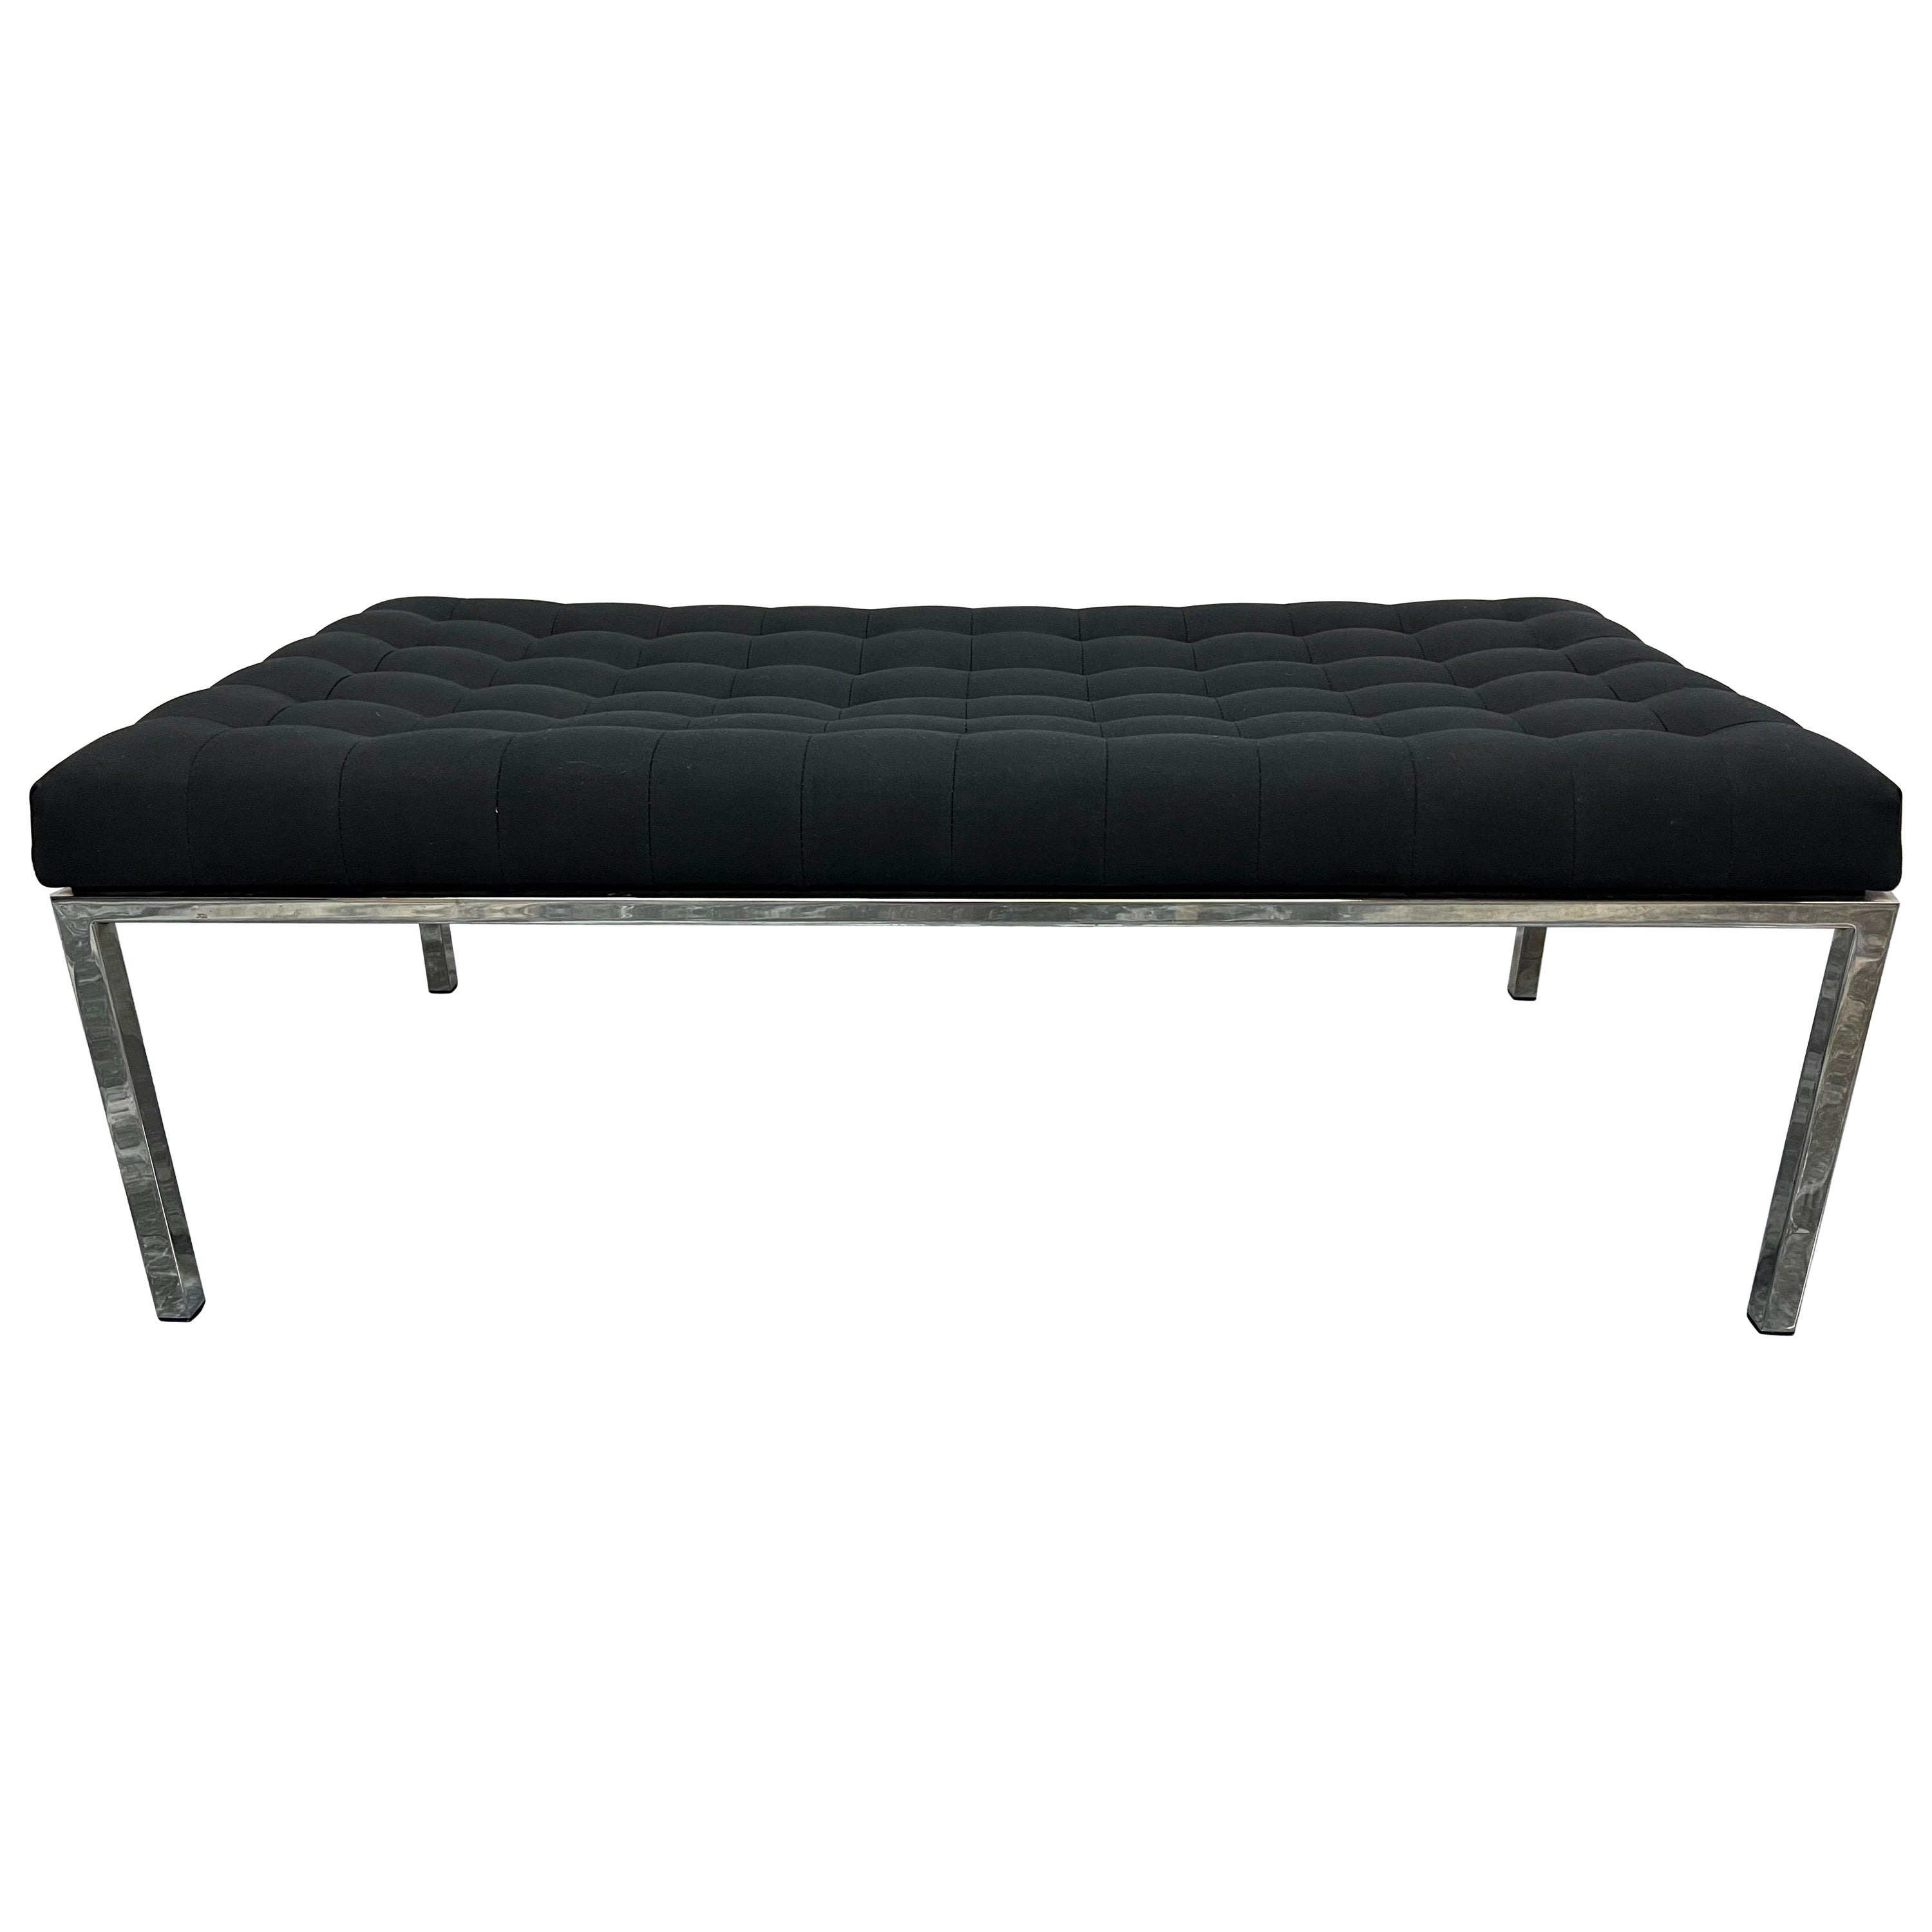 Black Tufted Canvas Museum Bench by Metropolitan Furniture, 1986 For Sale